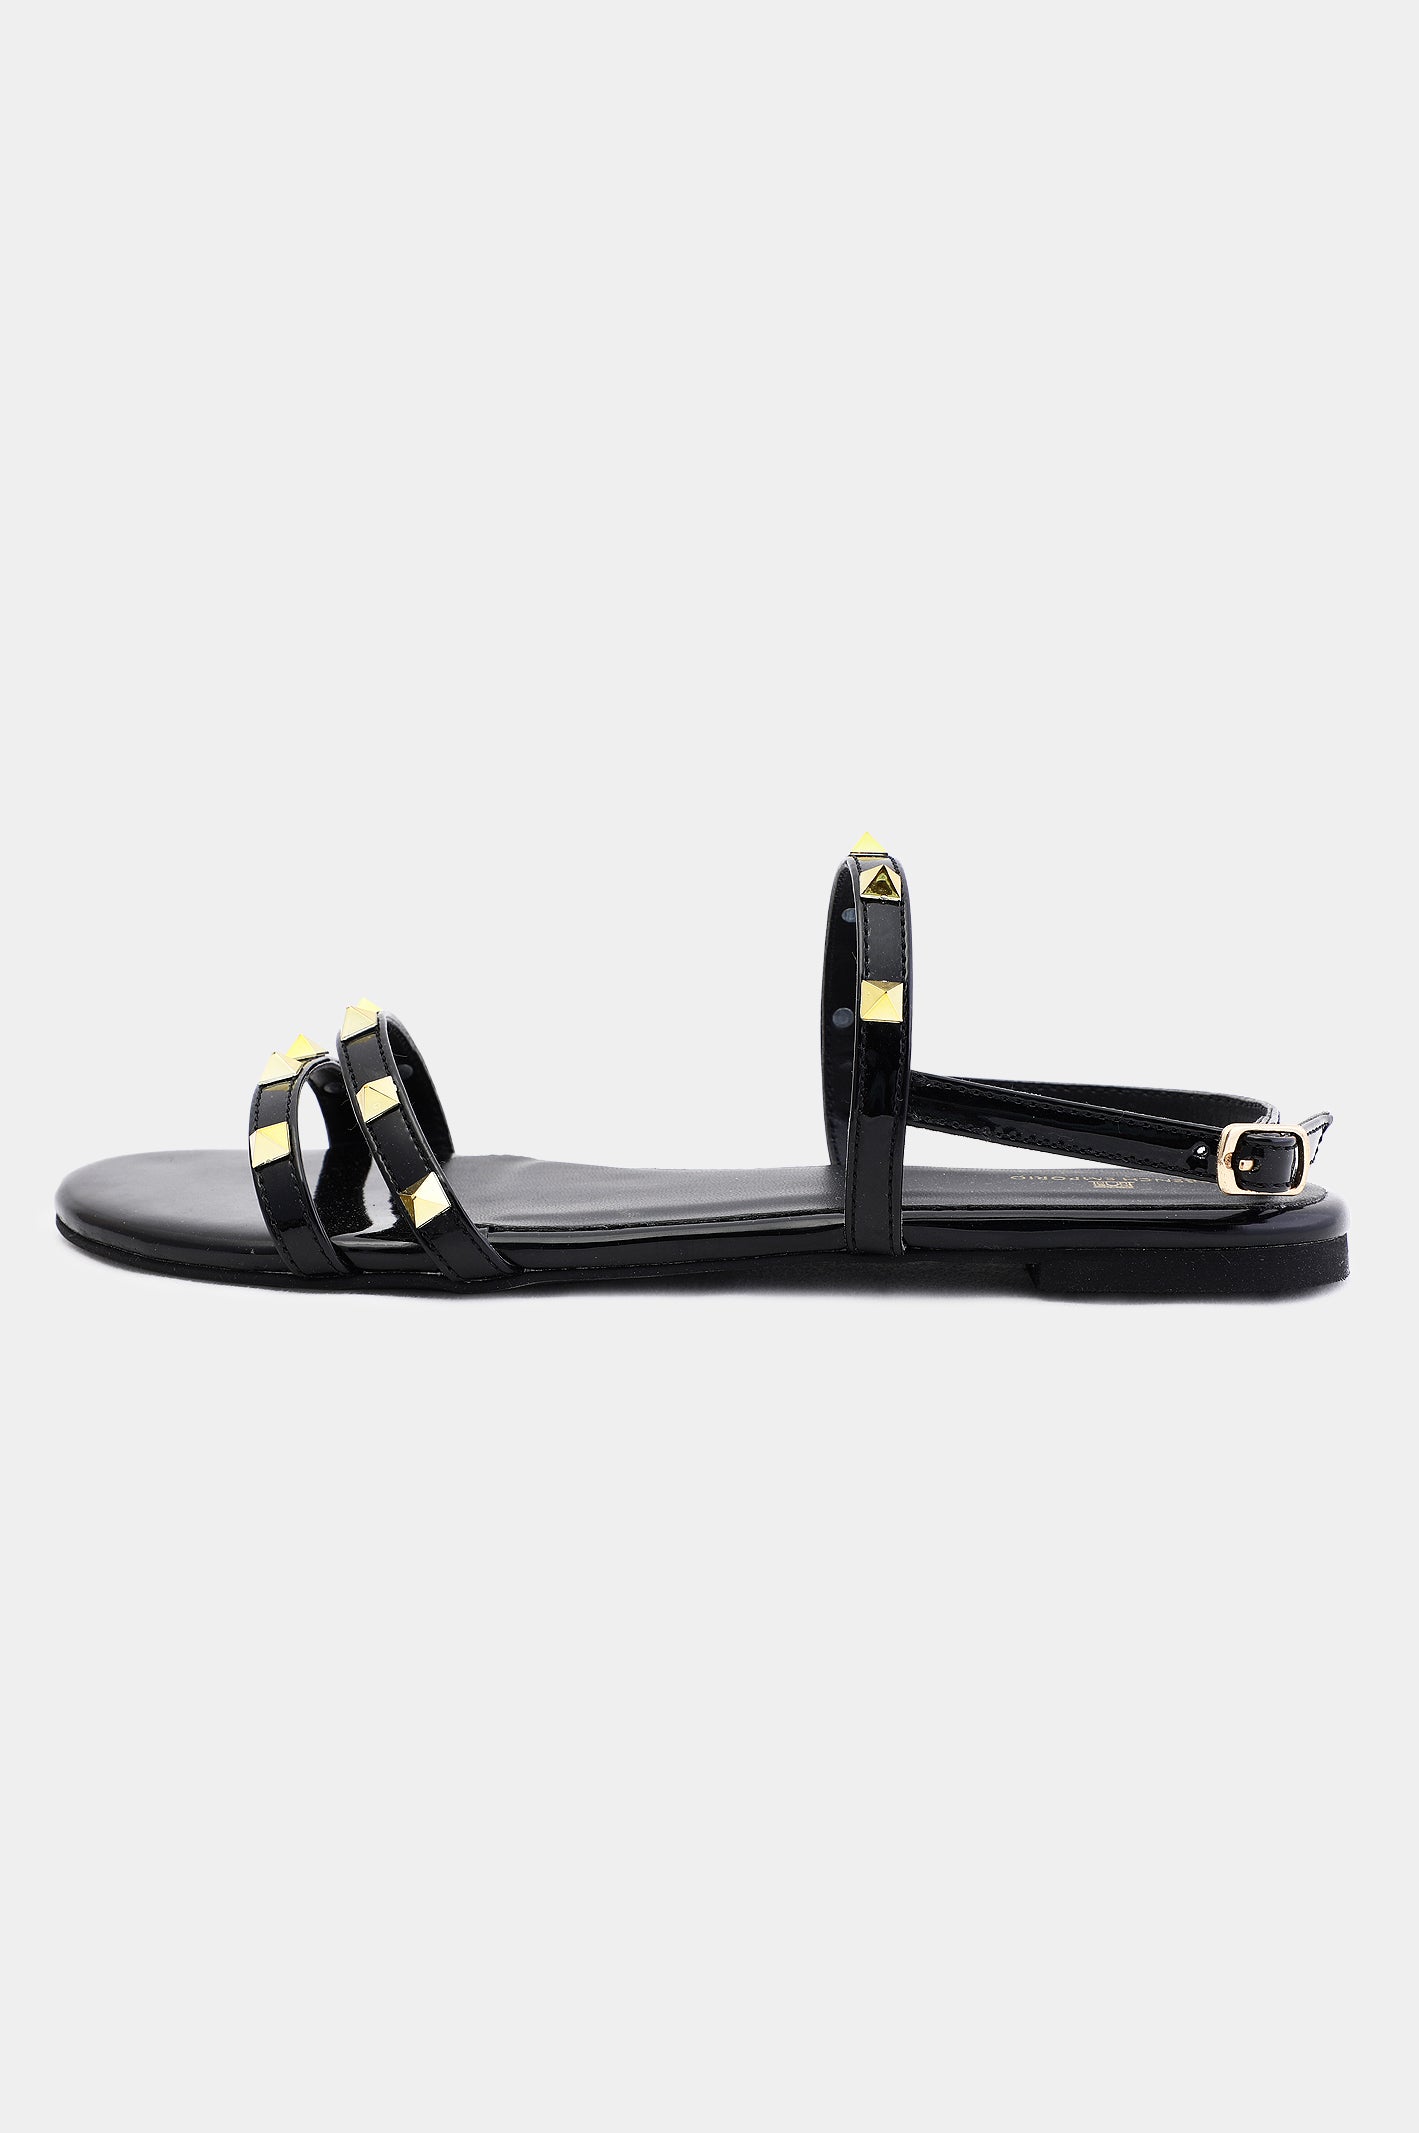 Black Ladies Formal Sandals From Diners